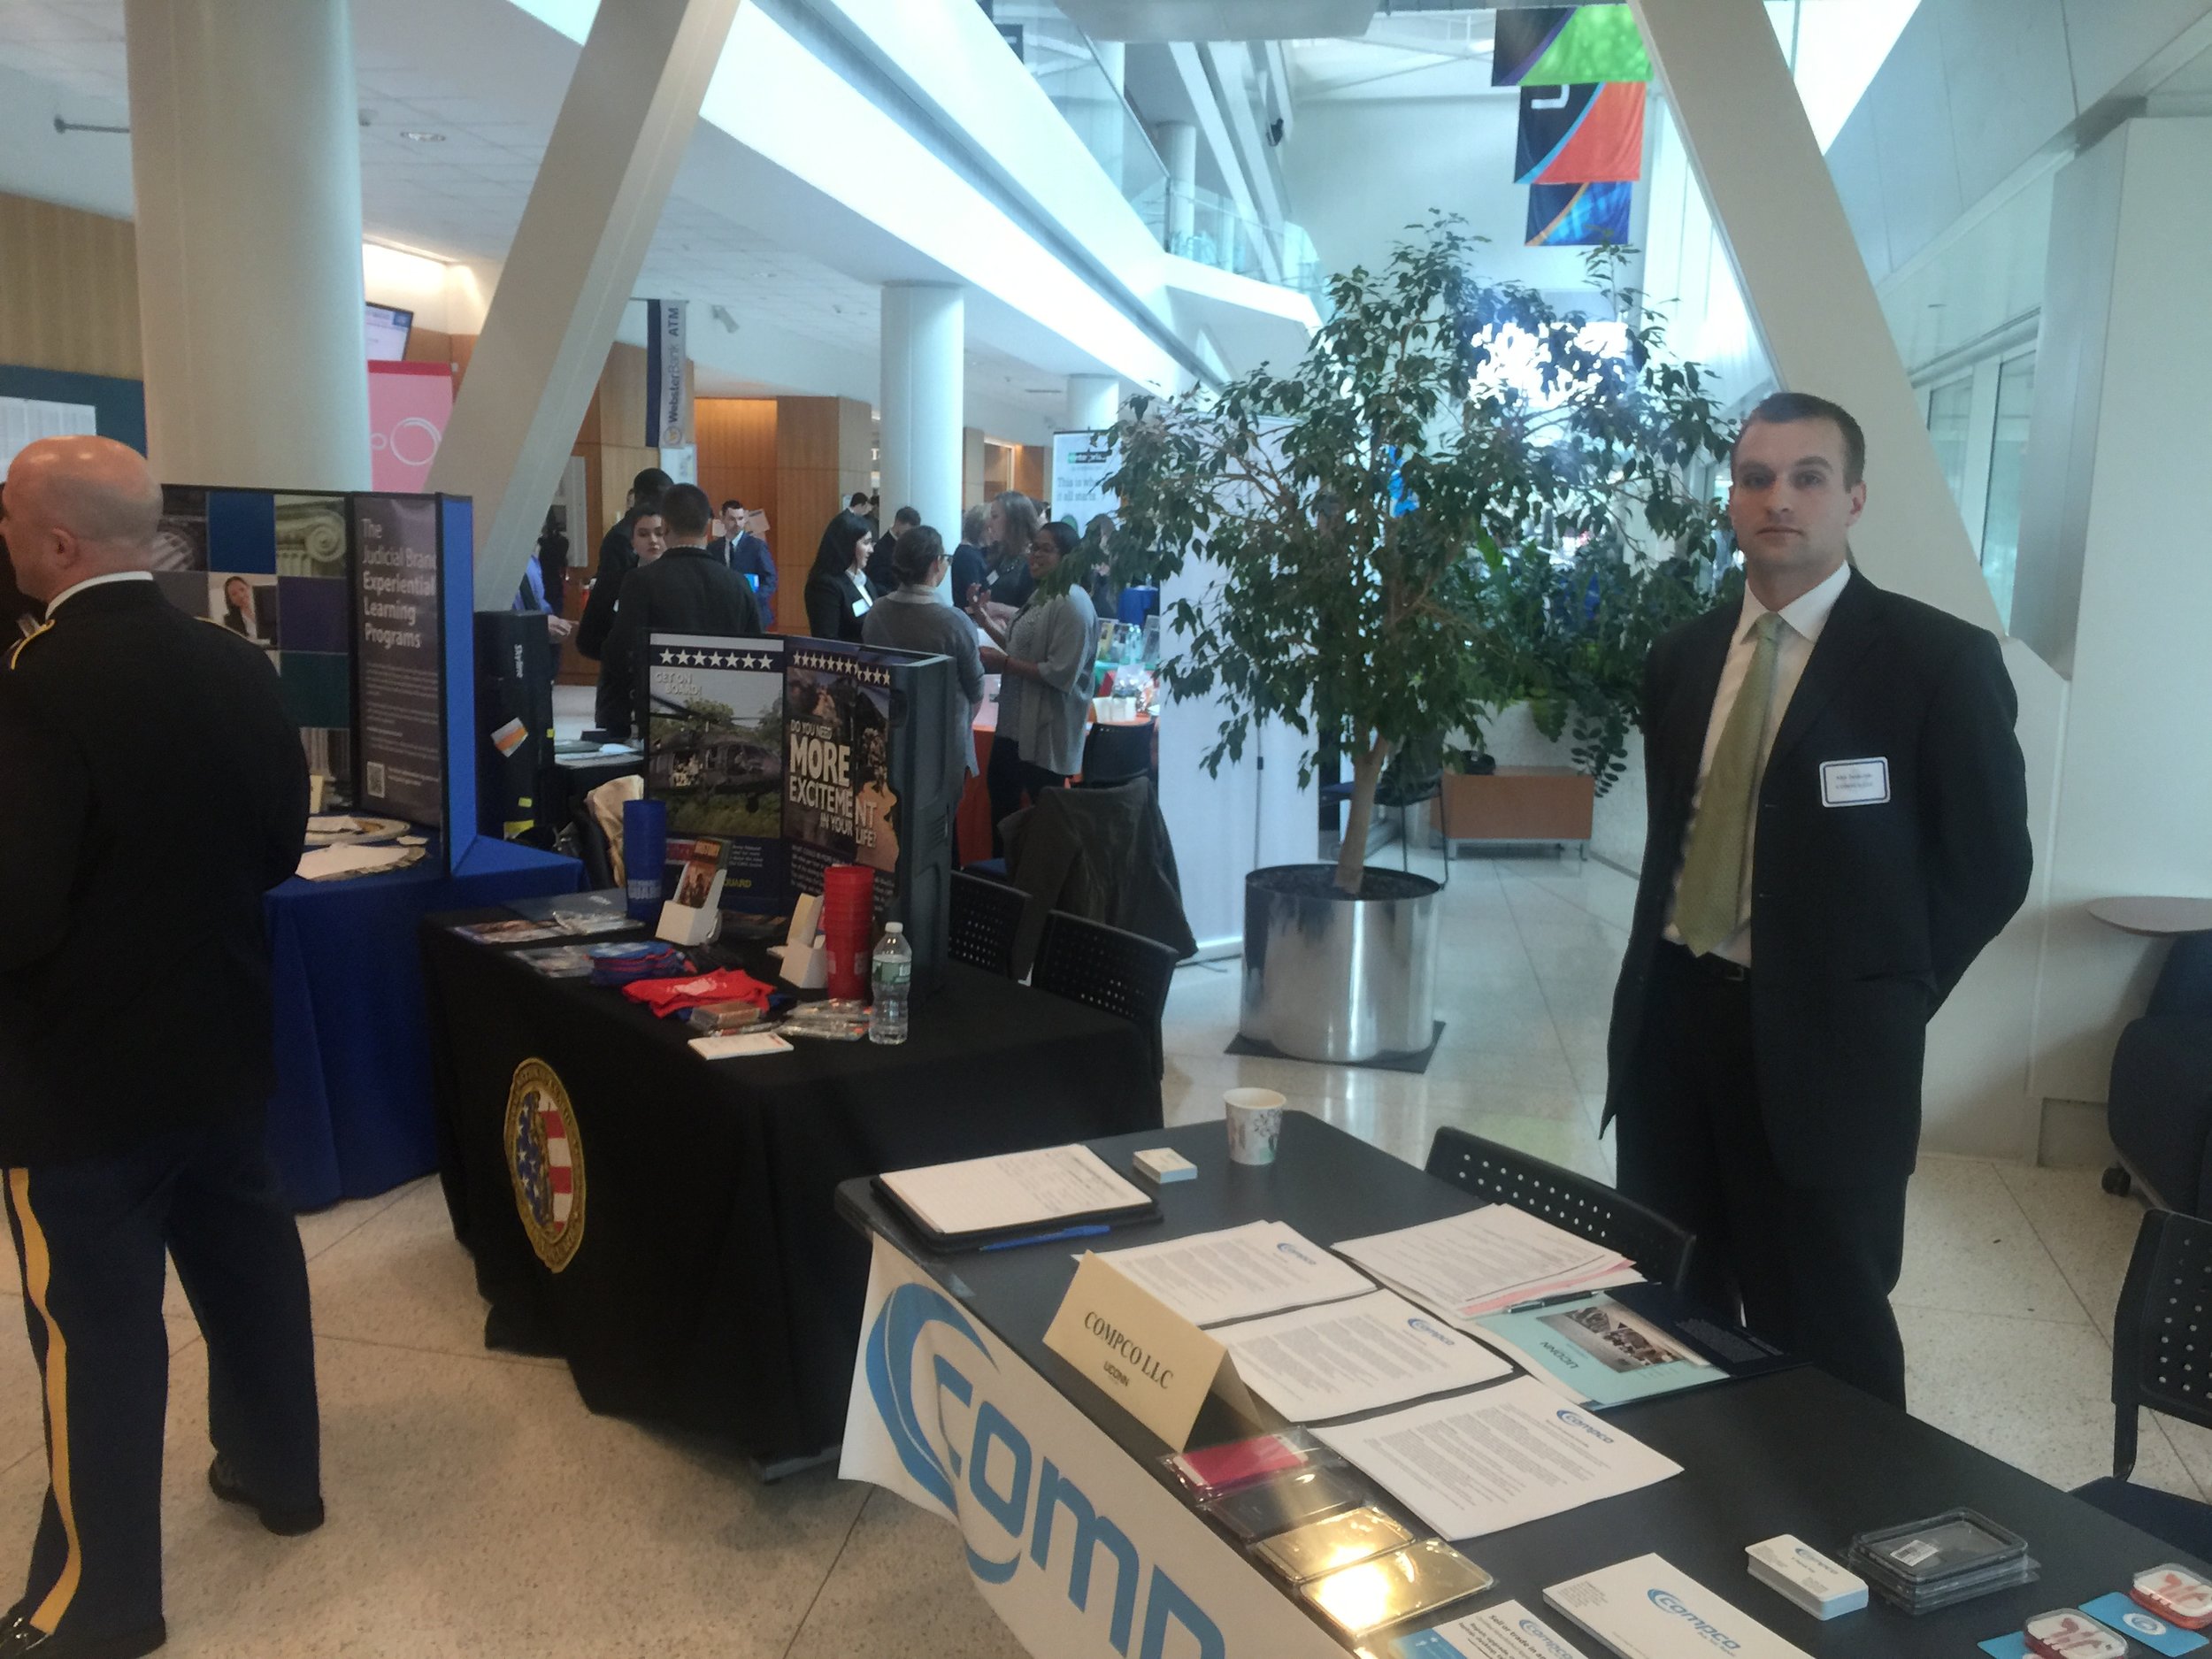  Compco’s first career fair at UConn Stamford 